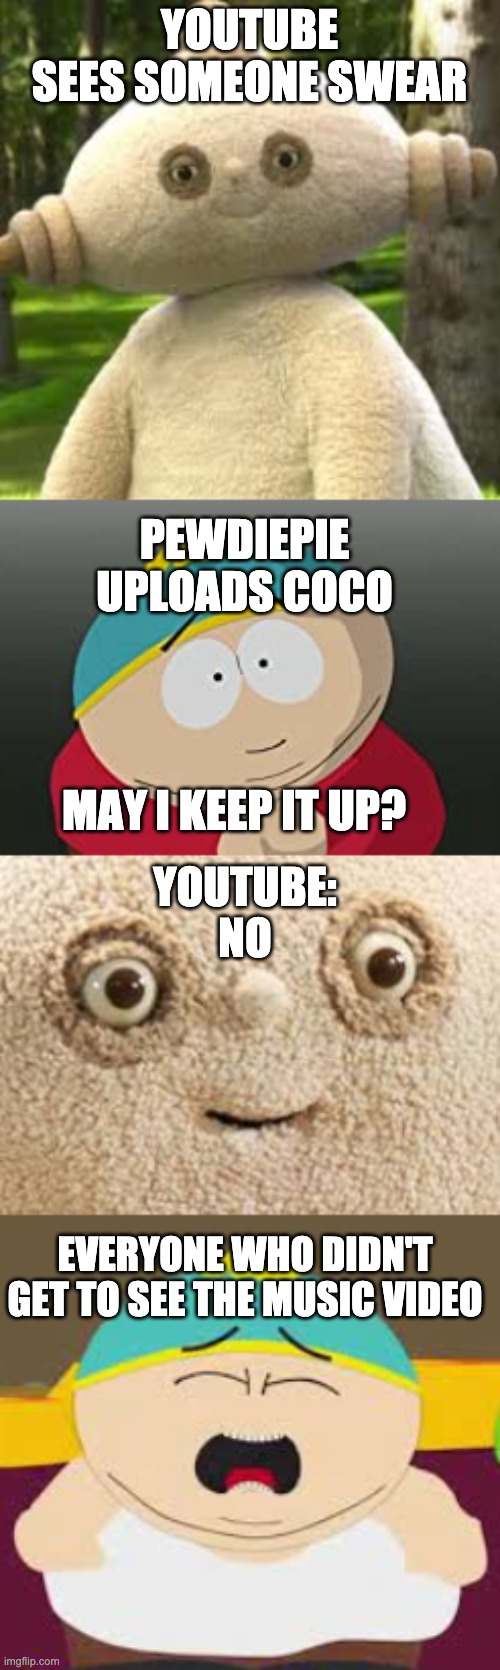 Youtube killed a great song | YOUTUBE
SEES SOMEONE SWEAR; PEWDIEPIE
UPLOADS COCO; MAY I KEEP IT UP? YOUTUBE:
NO; EVERYONE WHO DIDN'T GET TO SEE THE MUSIC VIDEO | image tagged in coco,youtube,rip | made w/ Imgflip meme maker